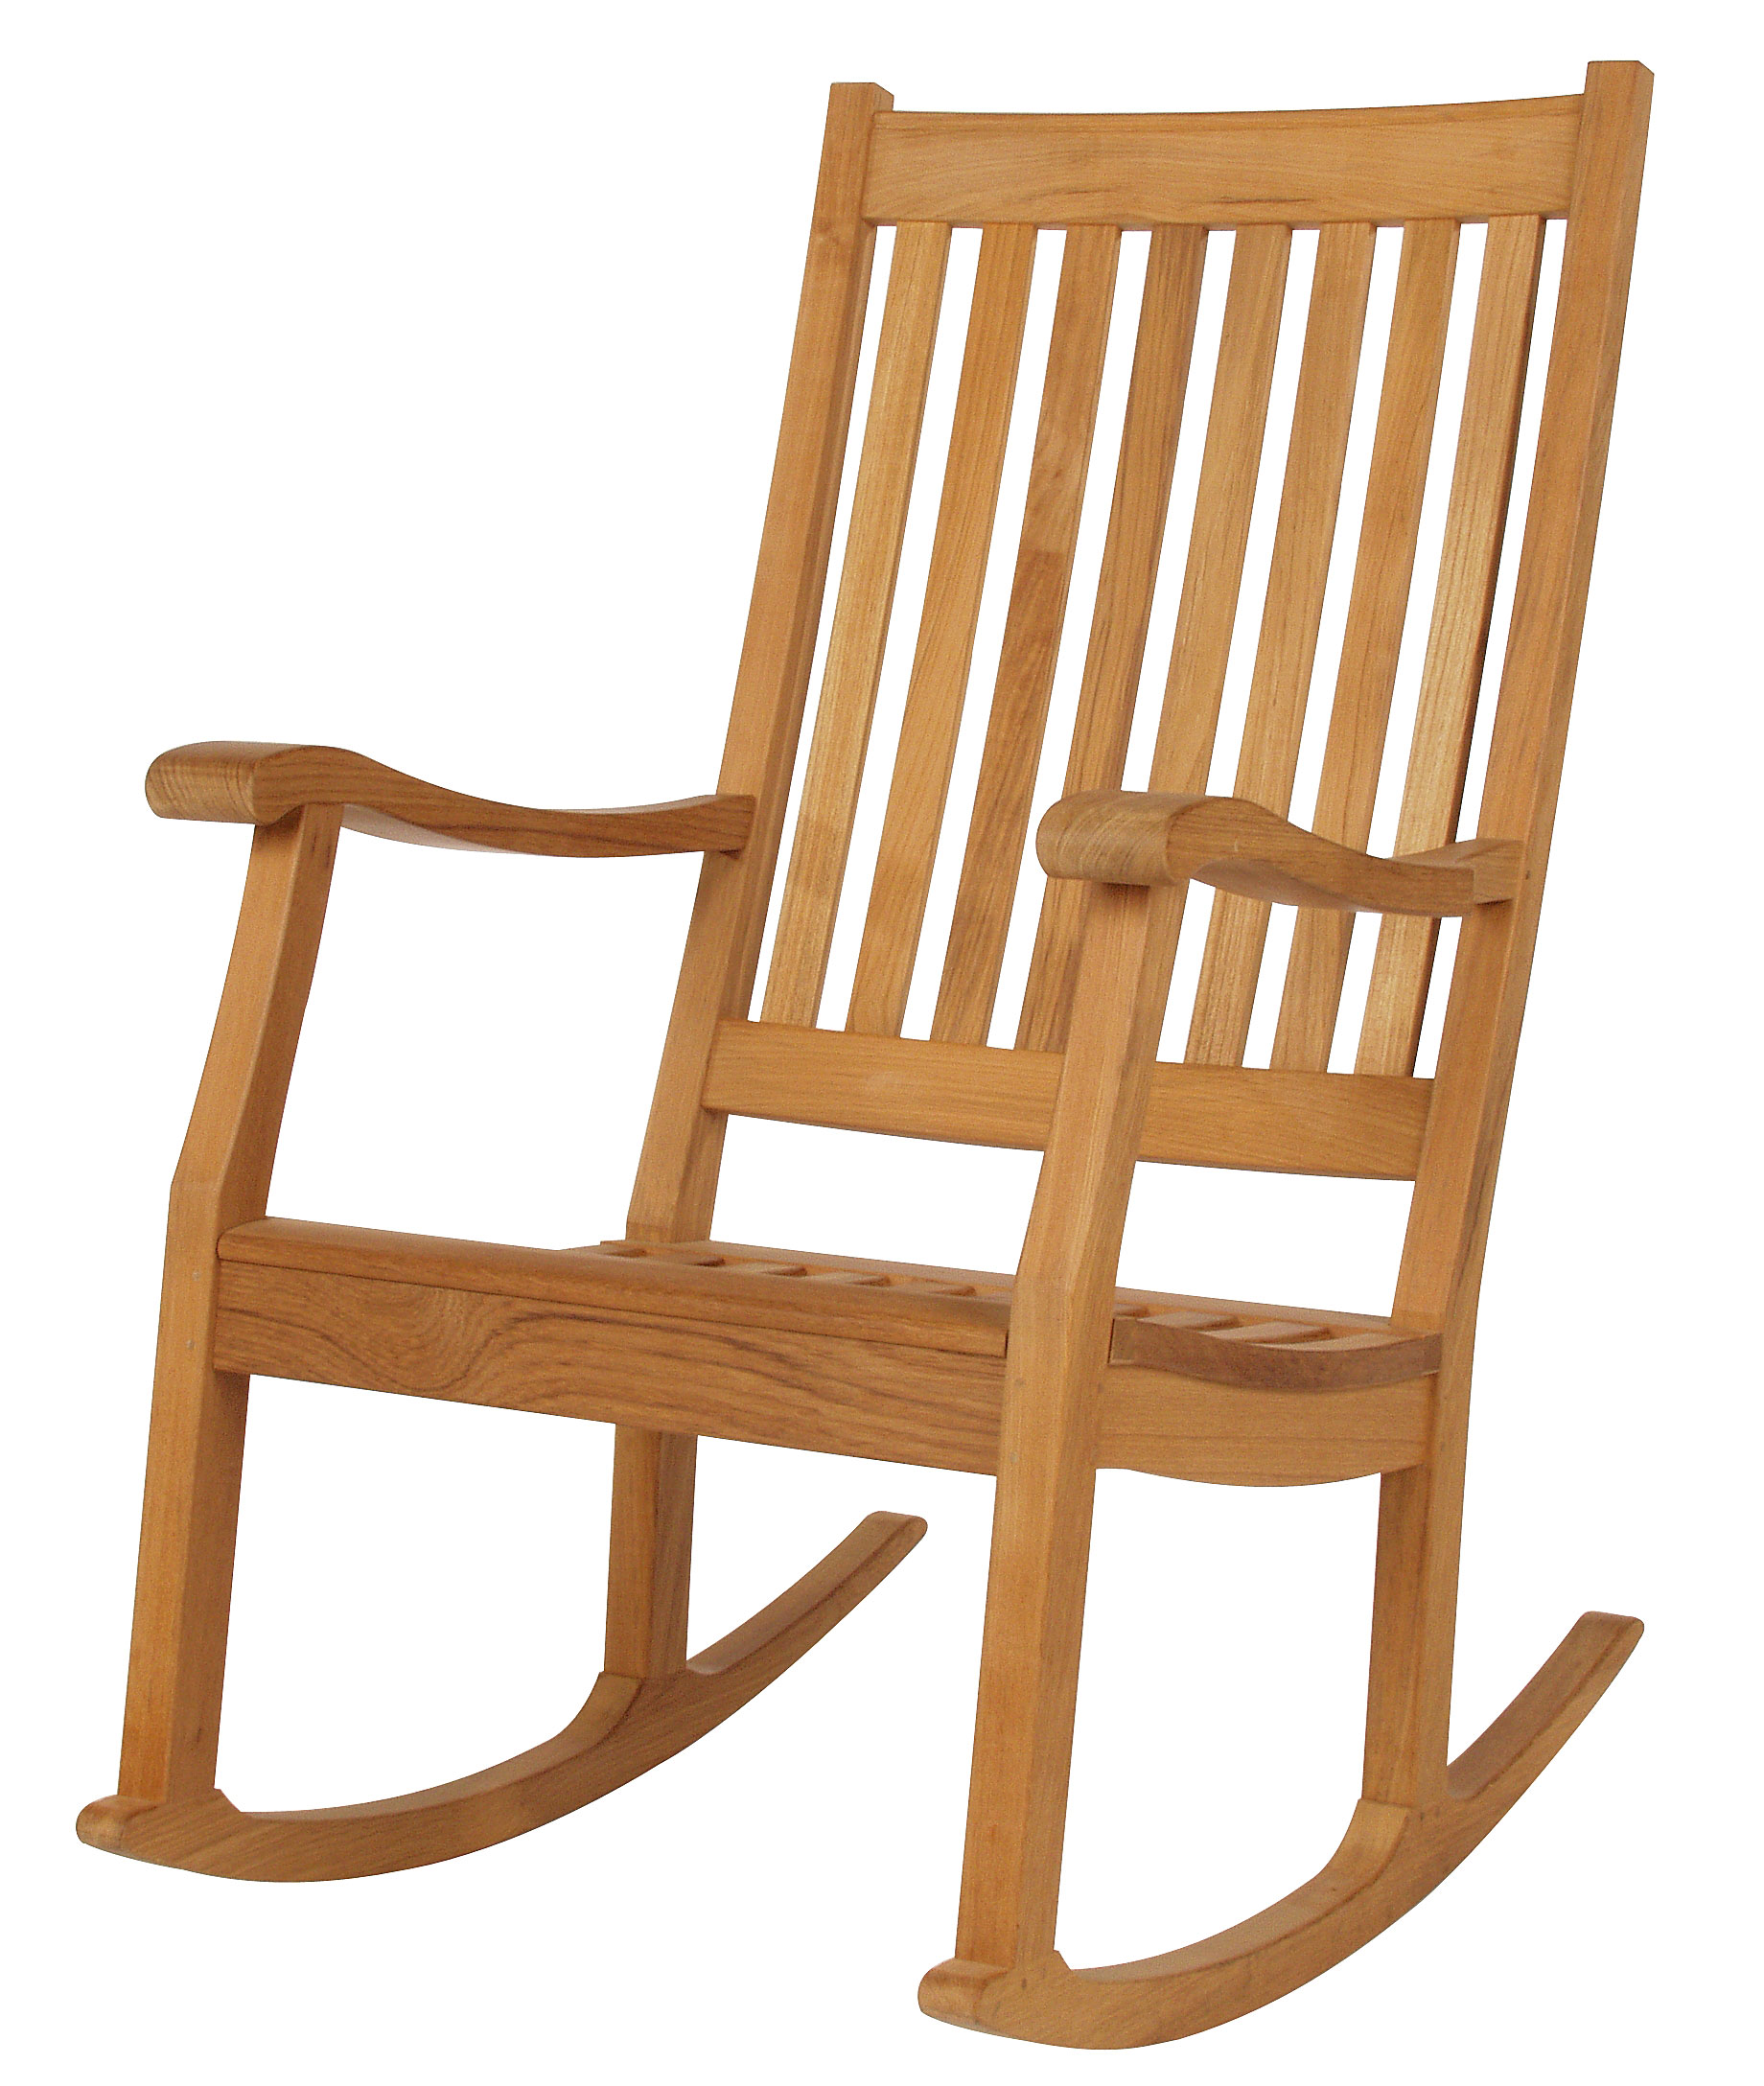 Barlow Tyrie Newport Rocking Chair(Excluding Cushion)